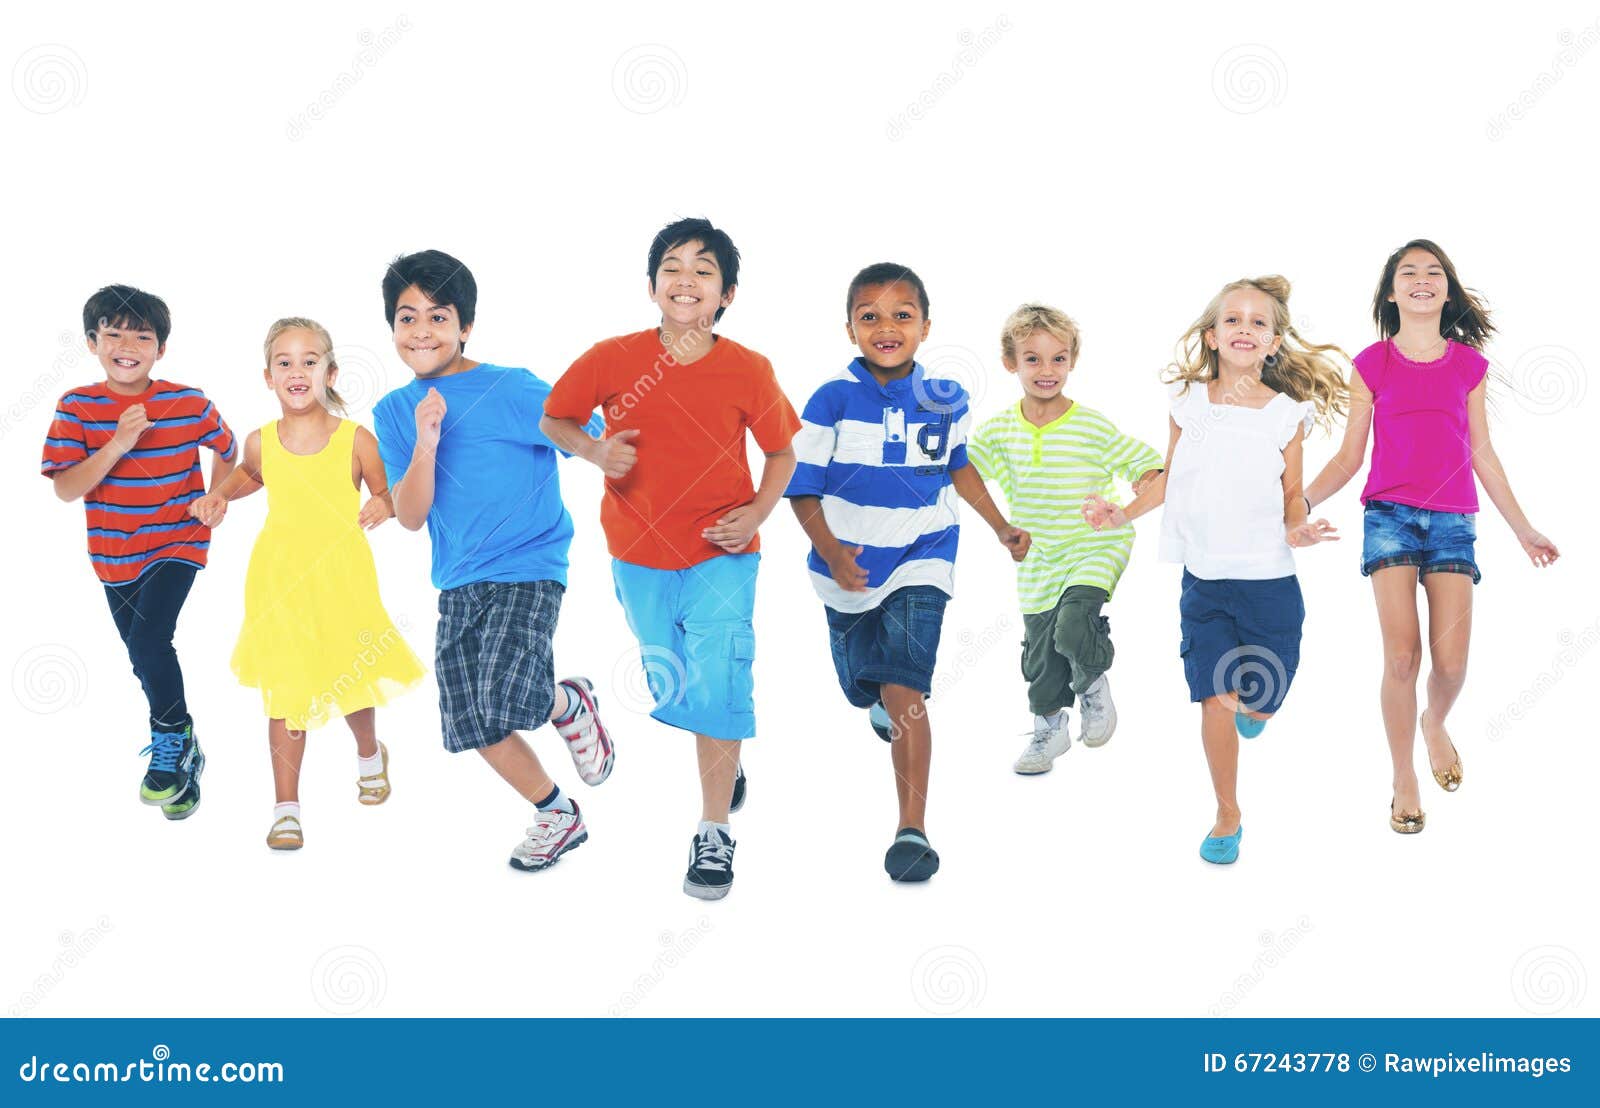 children running playing together enjoyment cute concept